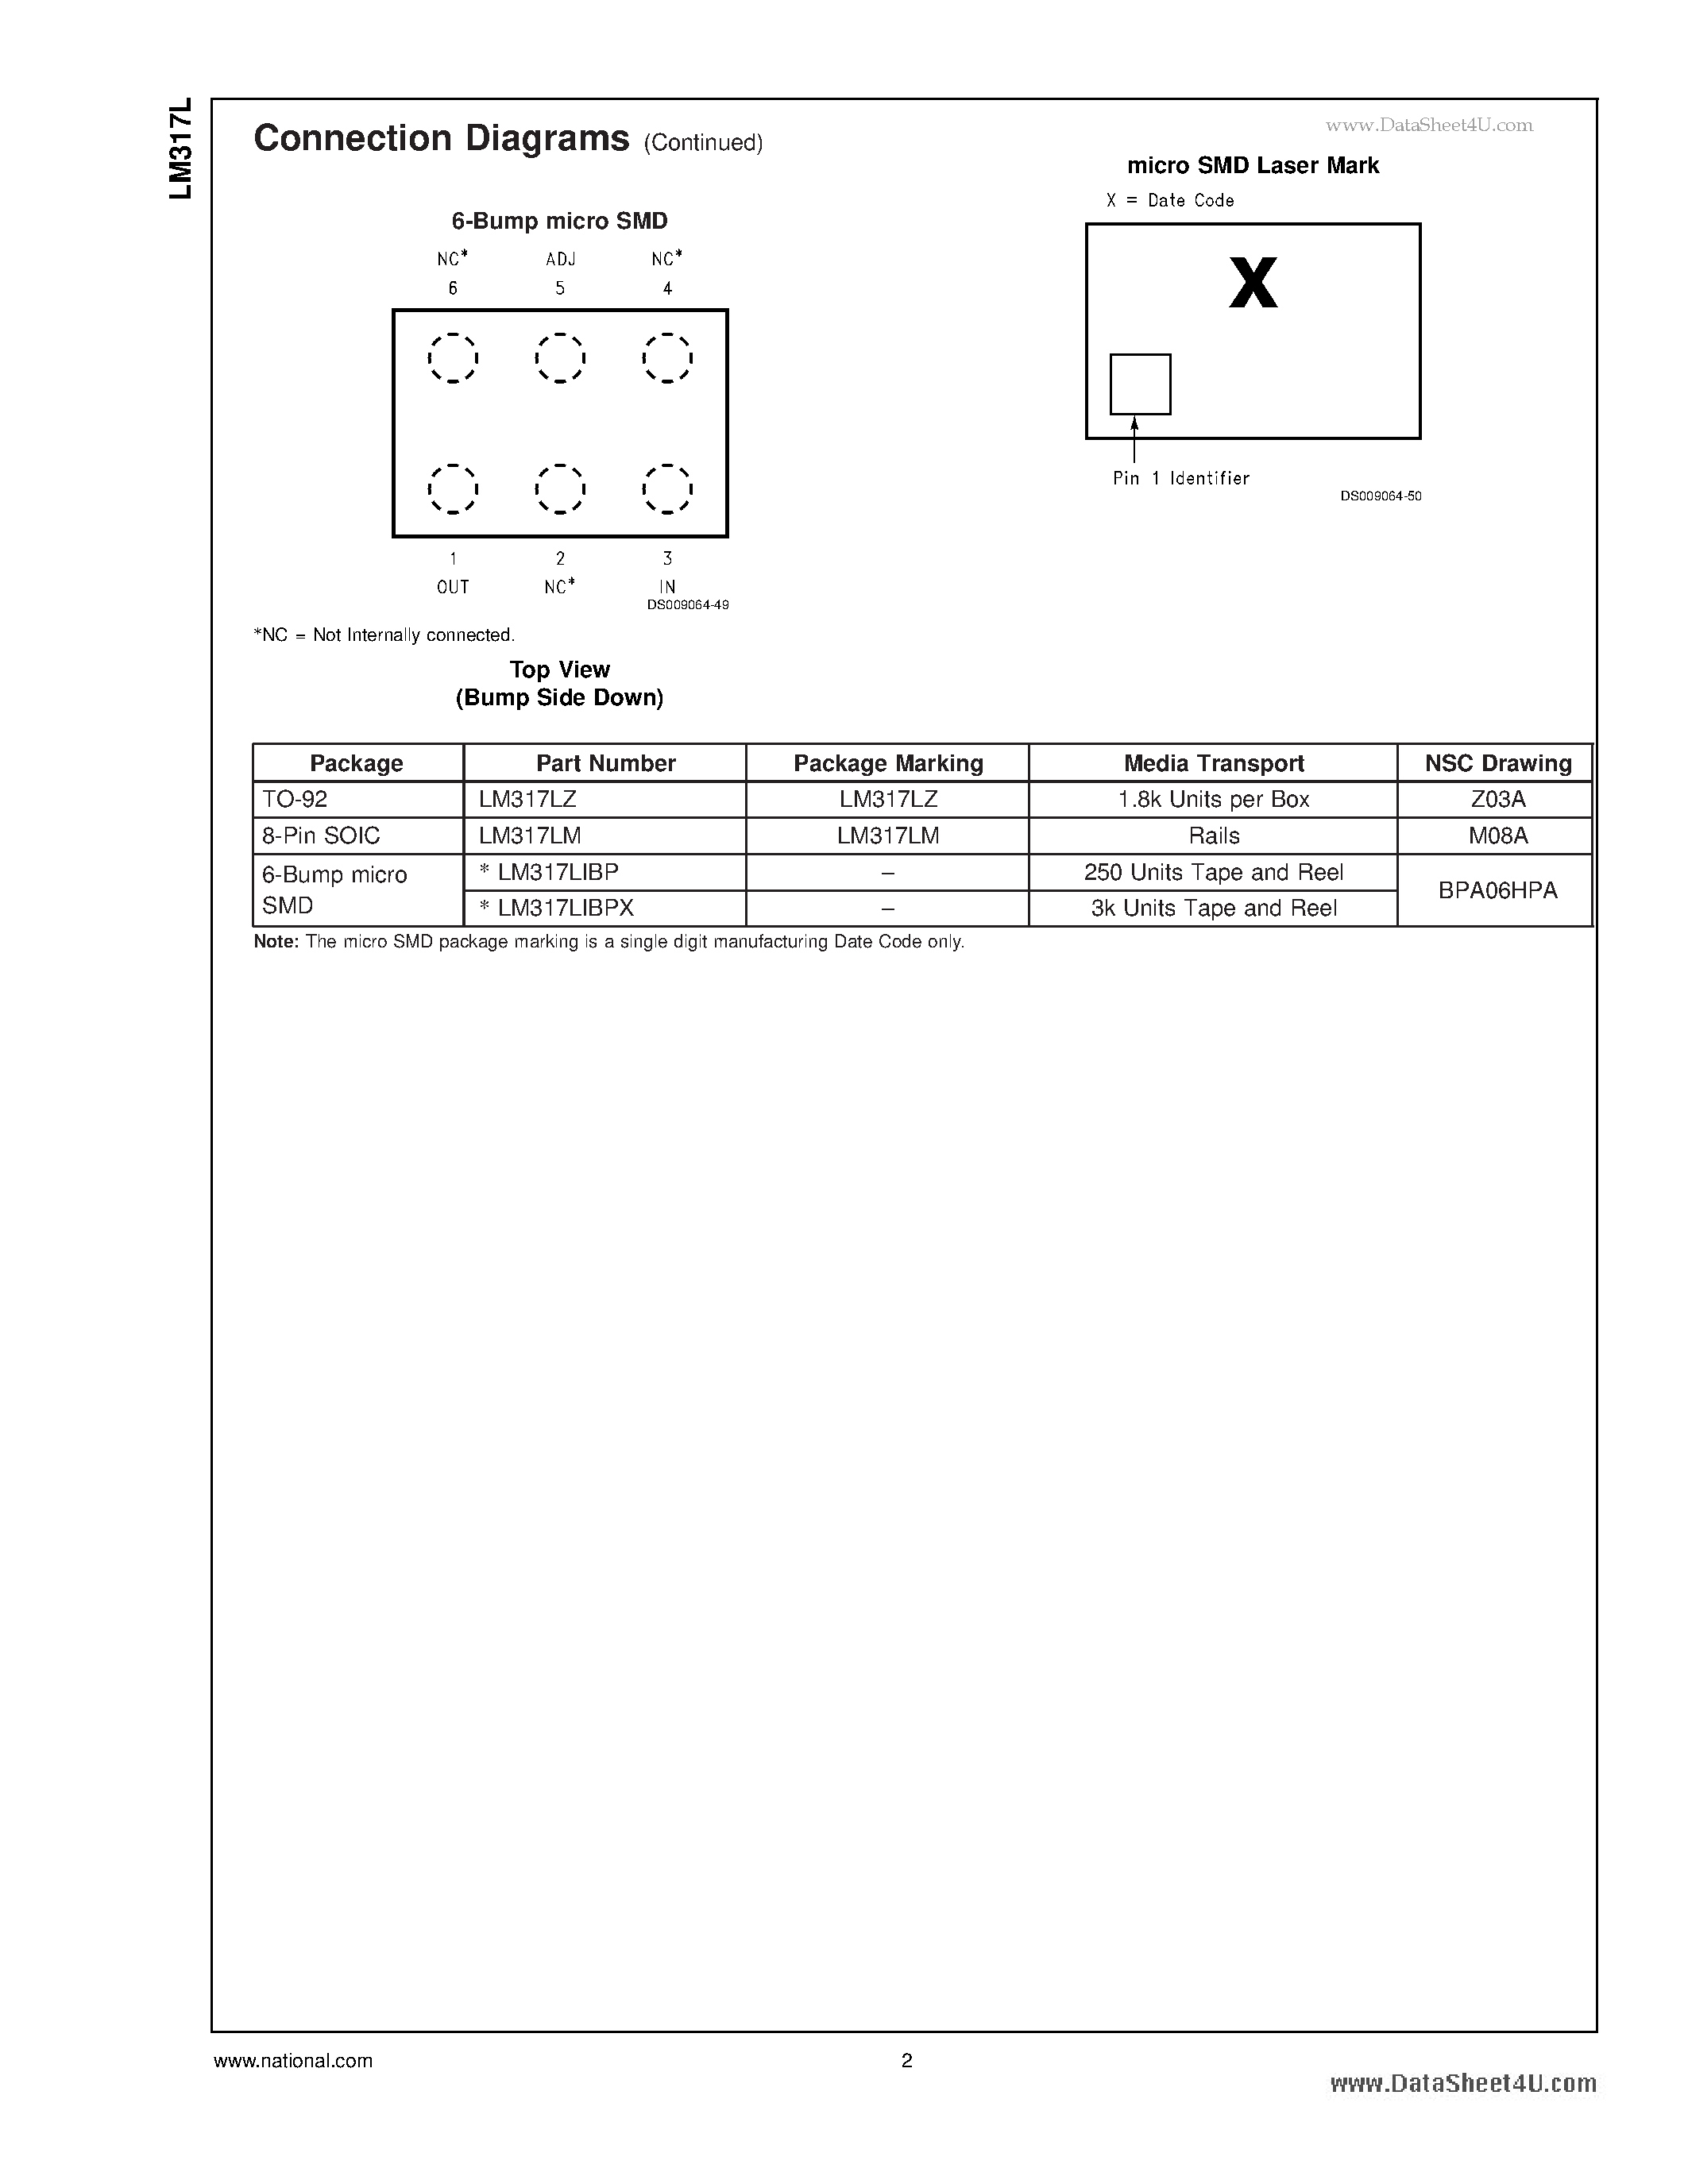 Datasheet 317LM - Search -----> LM317LM page 2